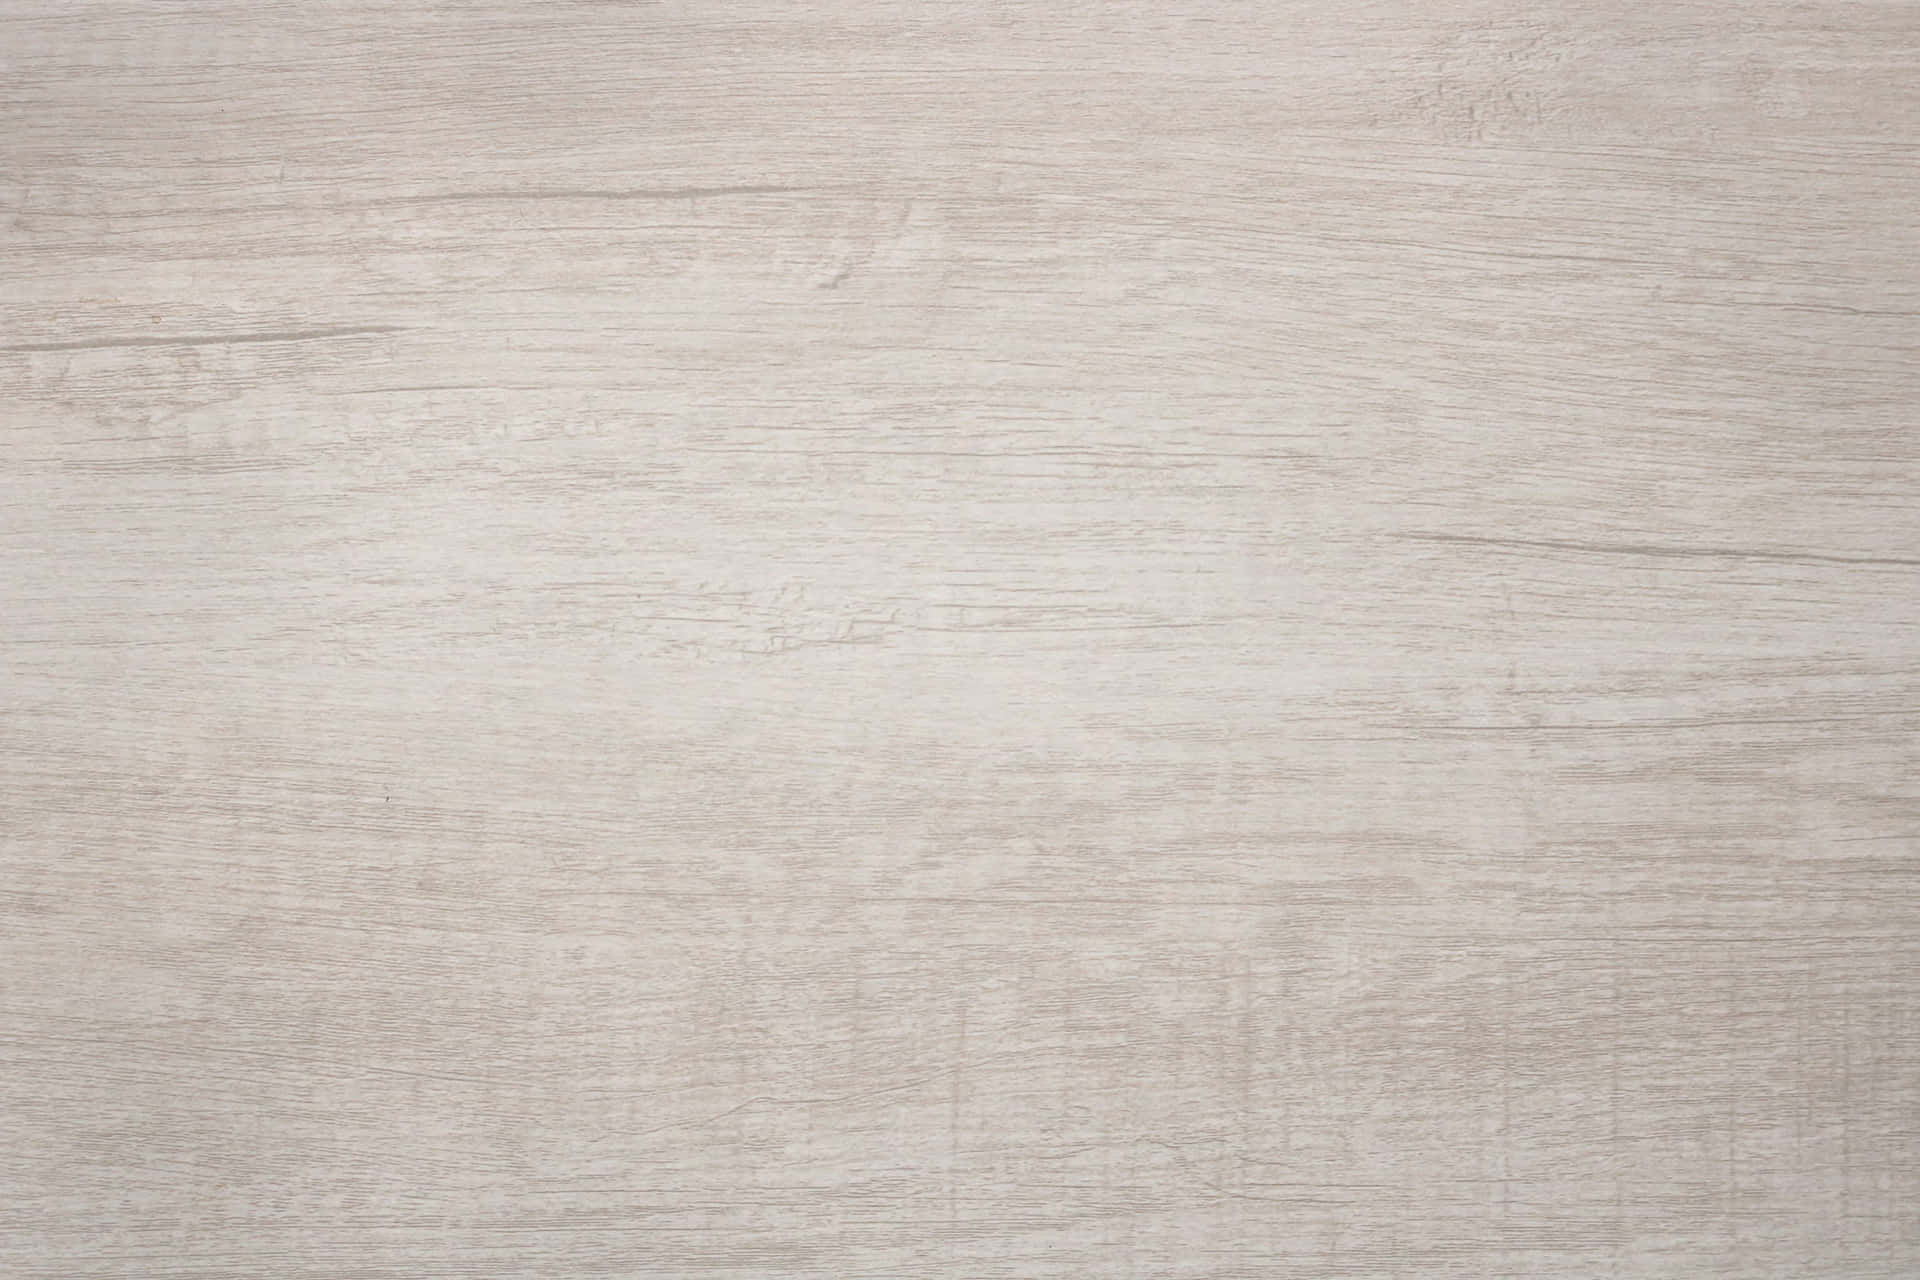 A White Wooden Background With A White Paint